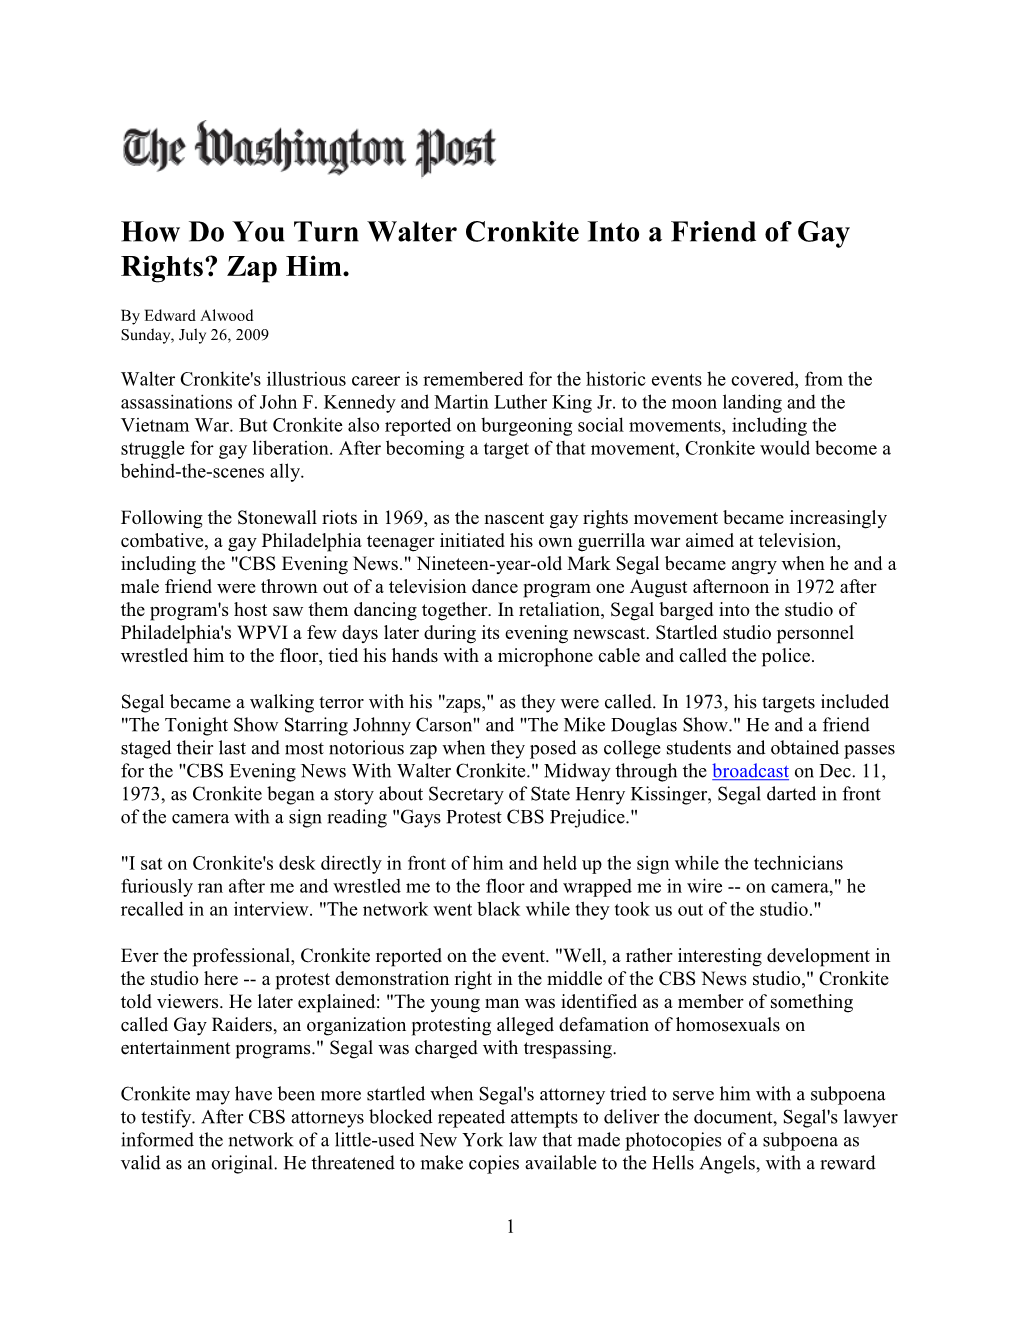 How Do You Turn Walter Cronkite Into a Friend of Gay Rights? Zap Him